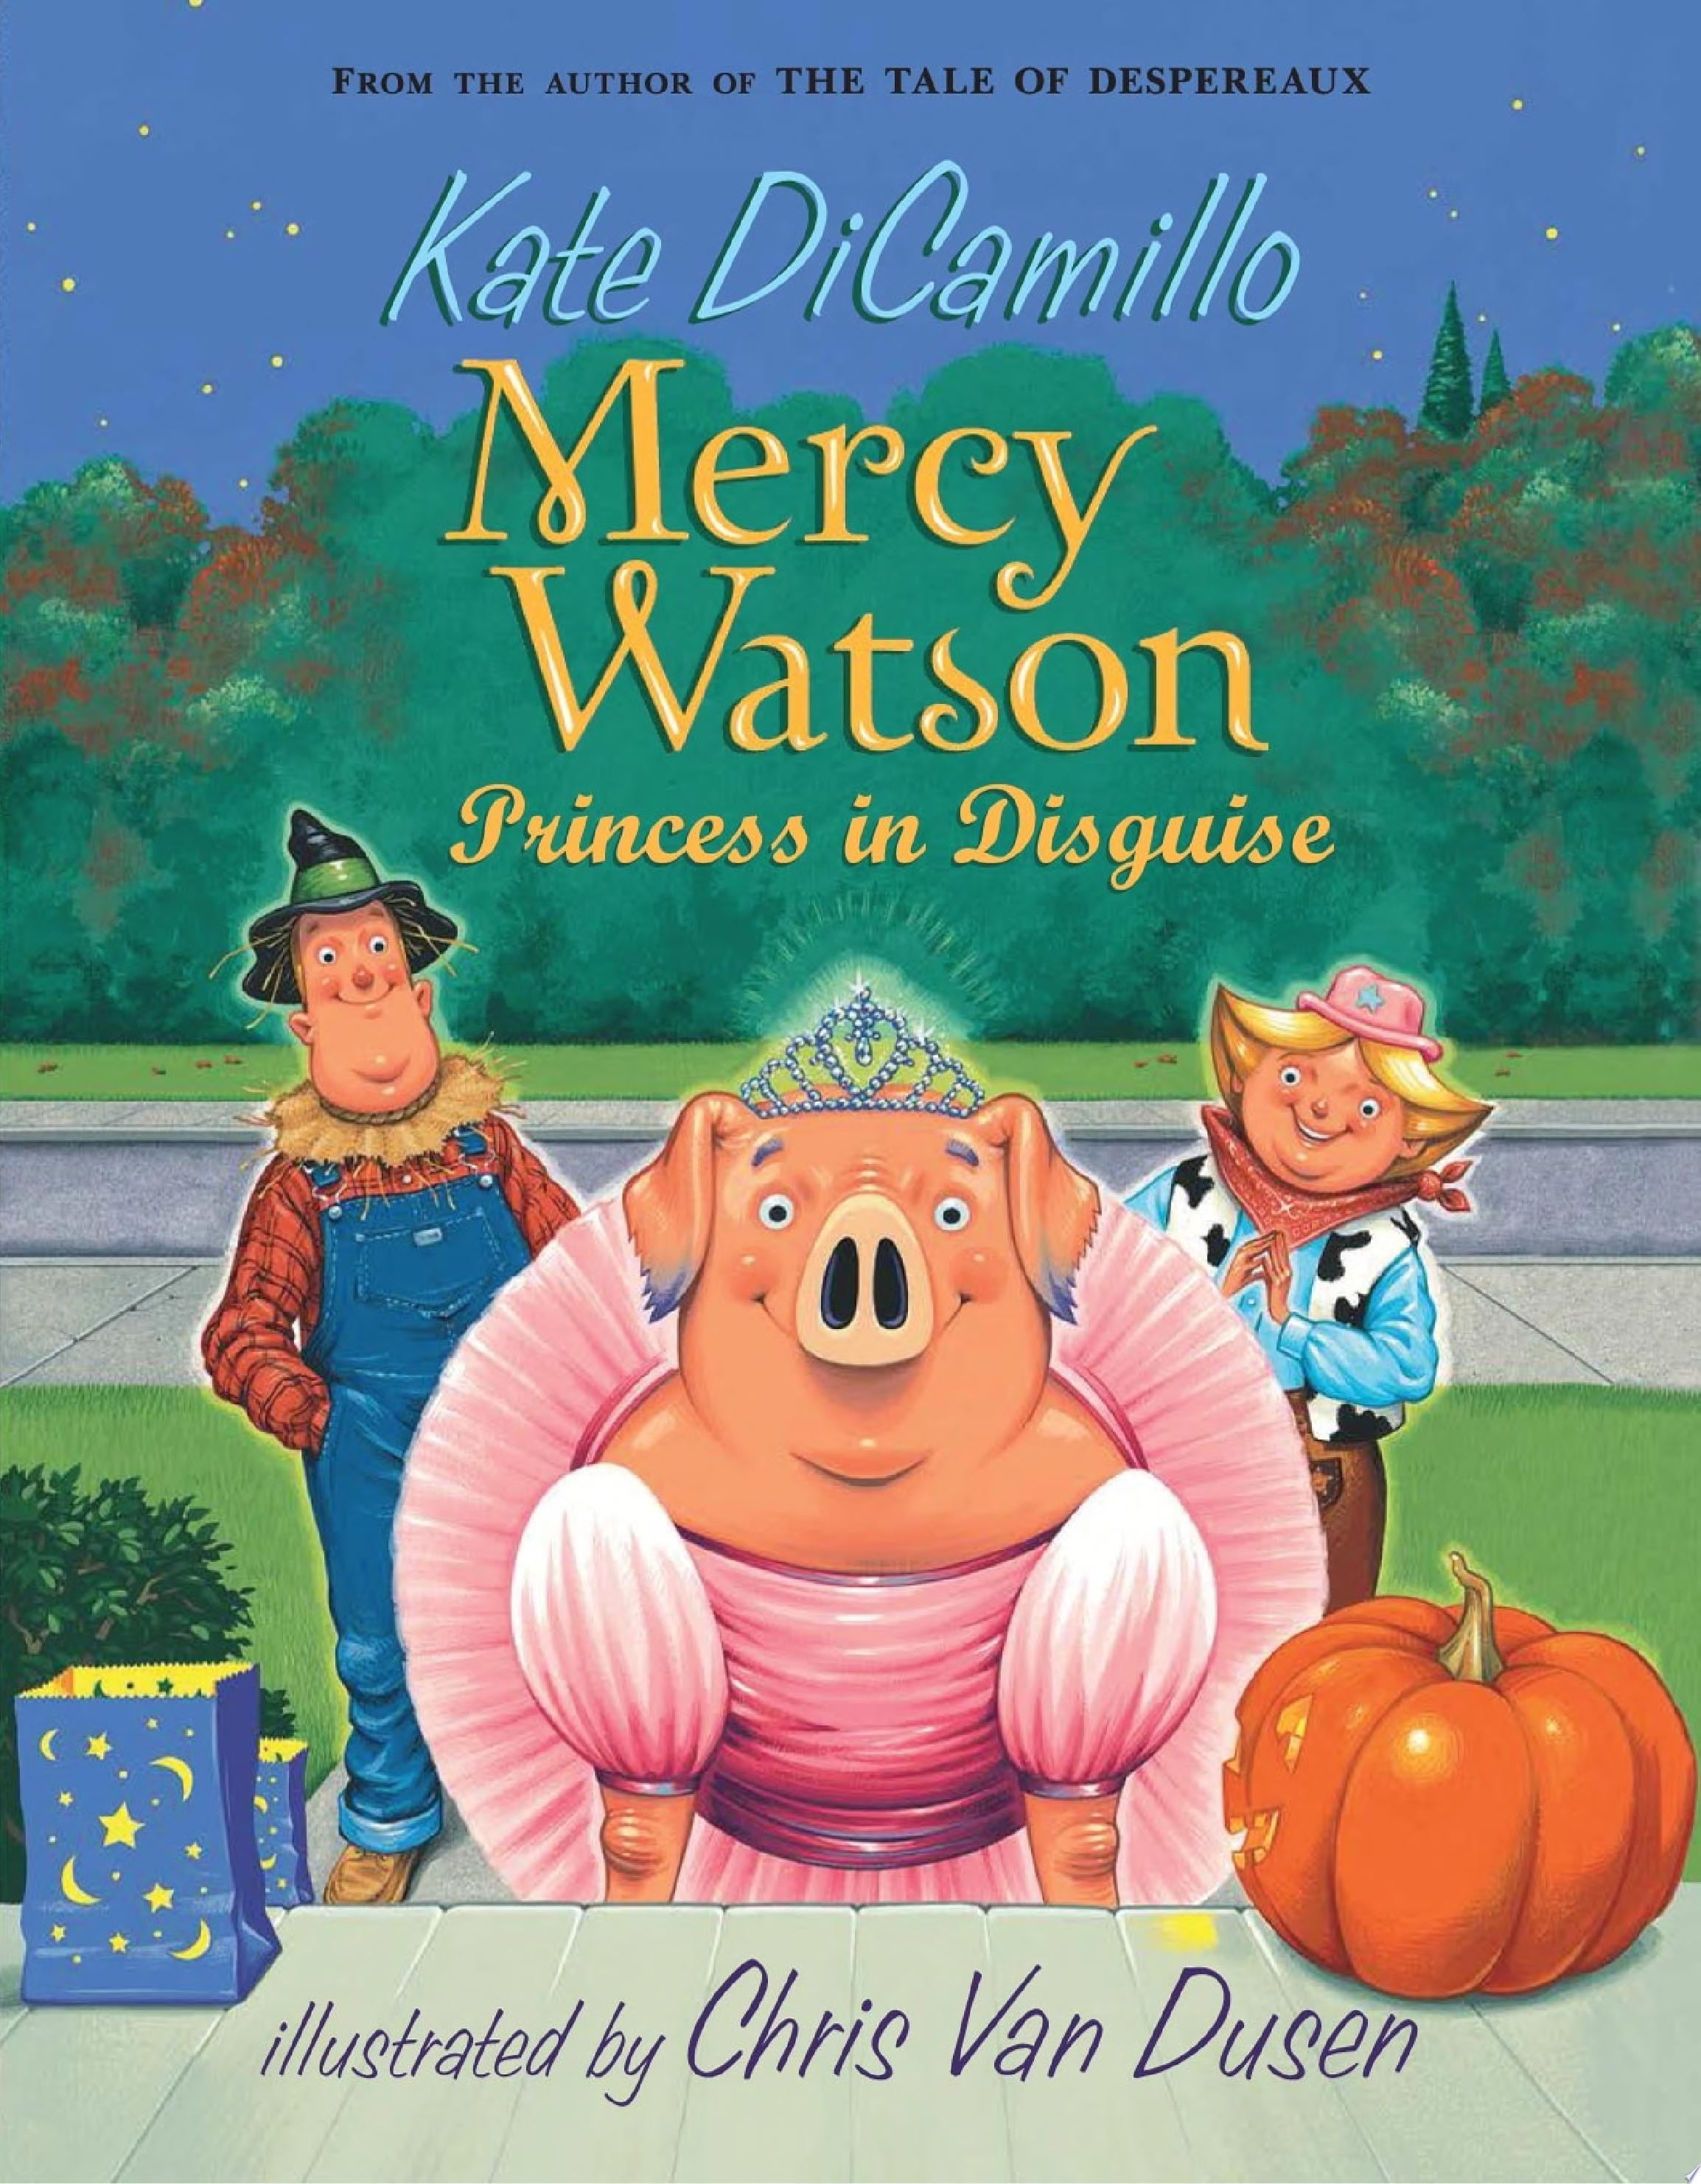 Image for "Mercy Watson: Princess in Disguise"